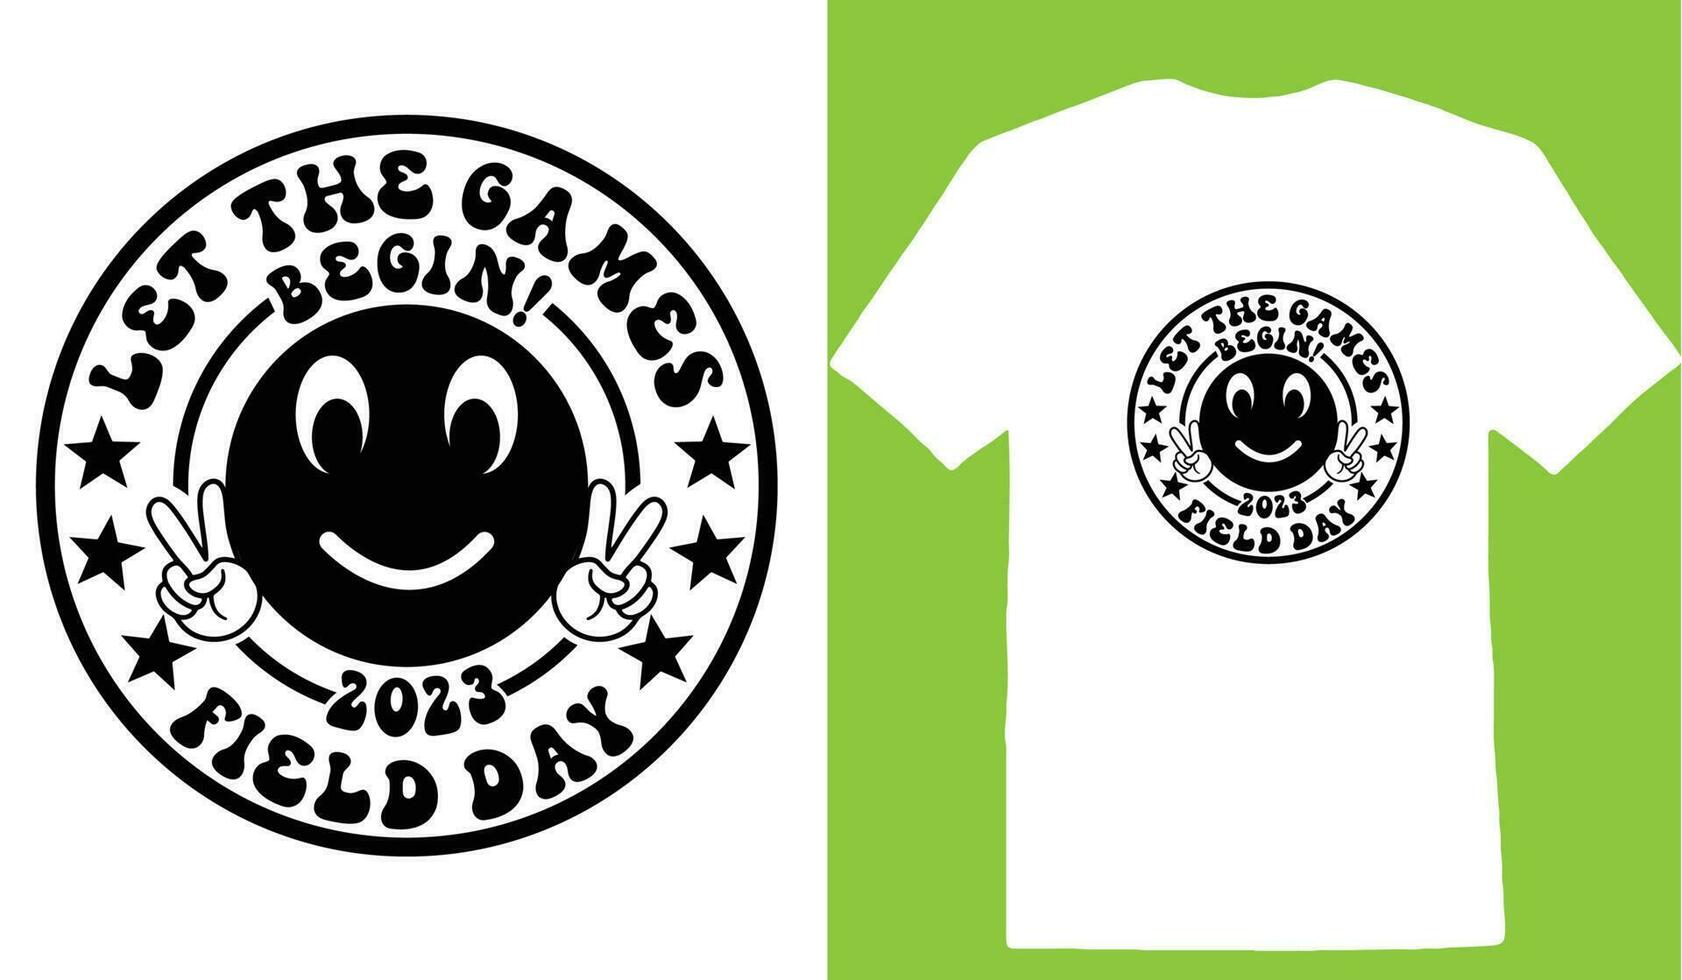 Let The Games Begin 2023 Field Day T-shirt vector